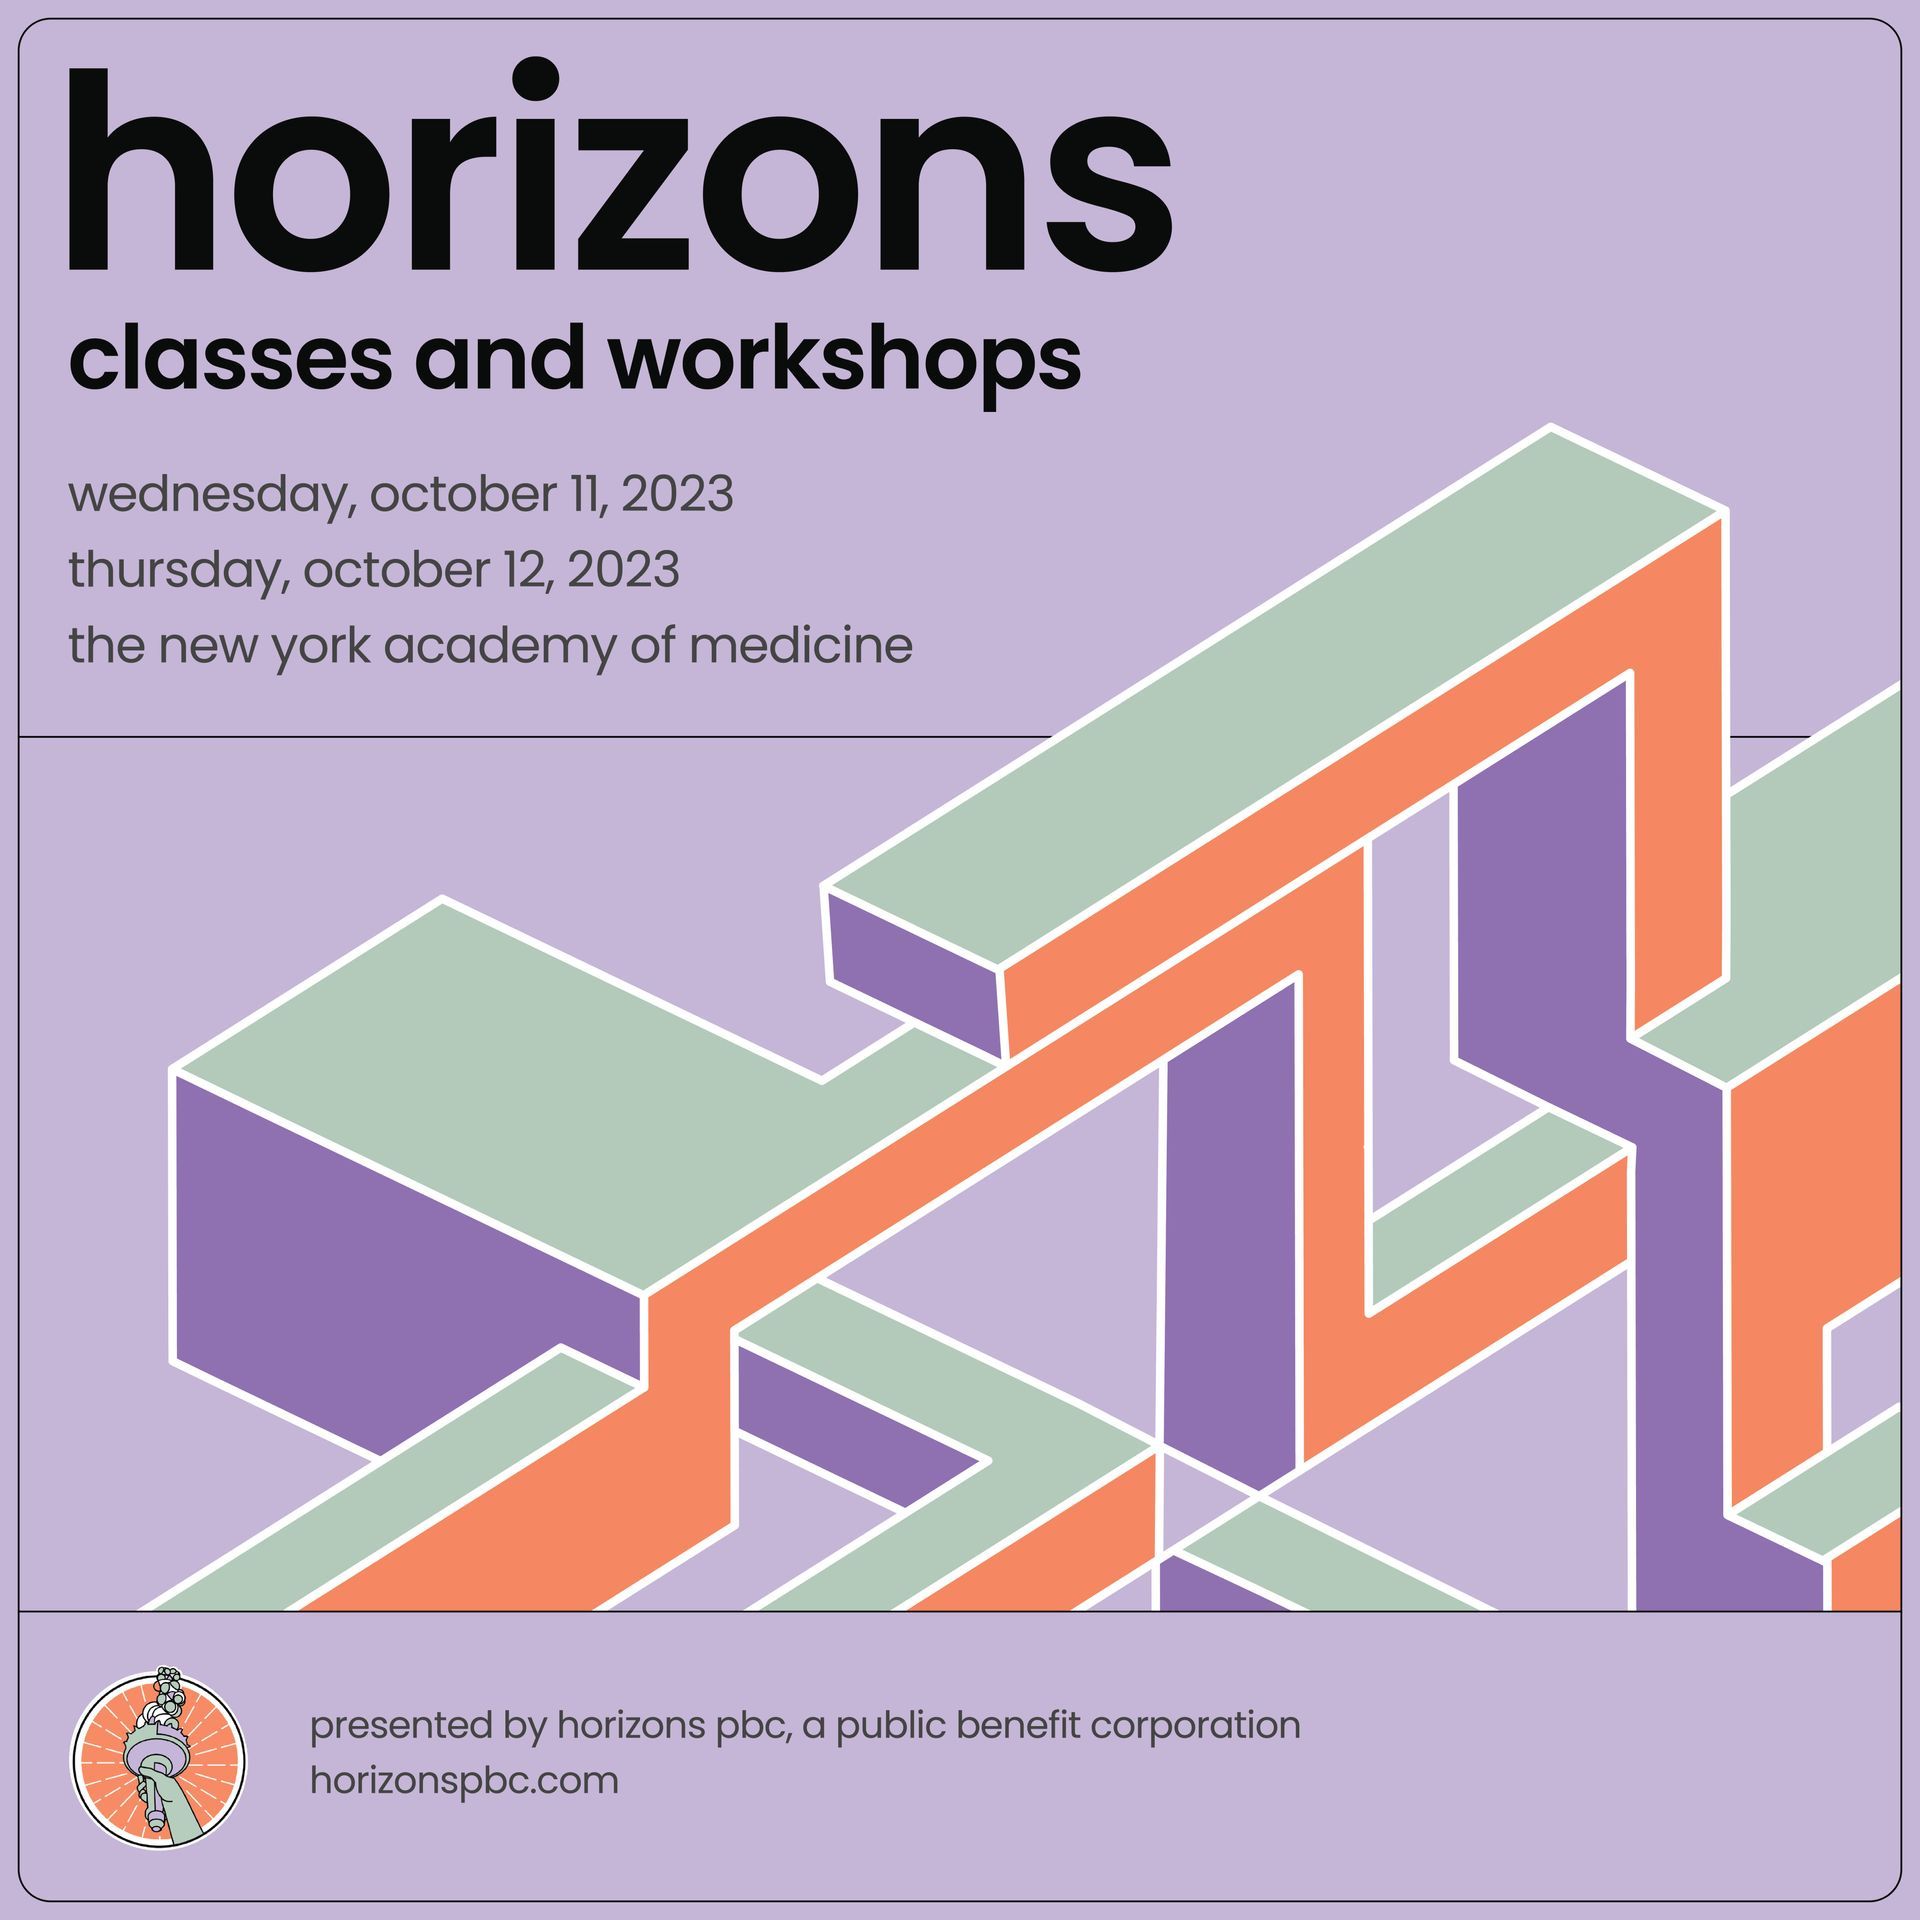 A poster for horizons classes and workshops on wednesday october 11 , 2023